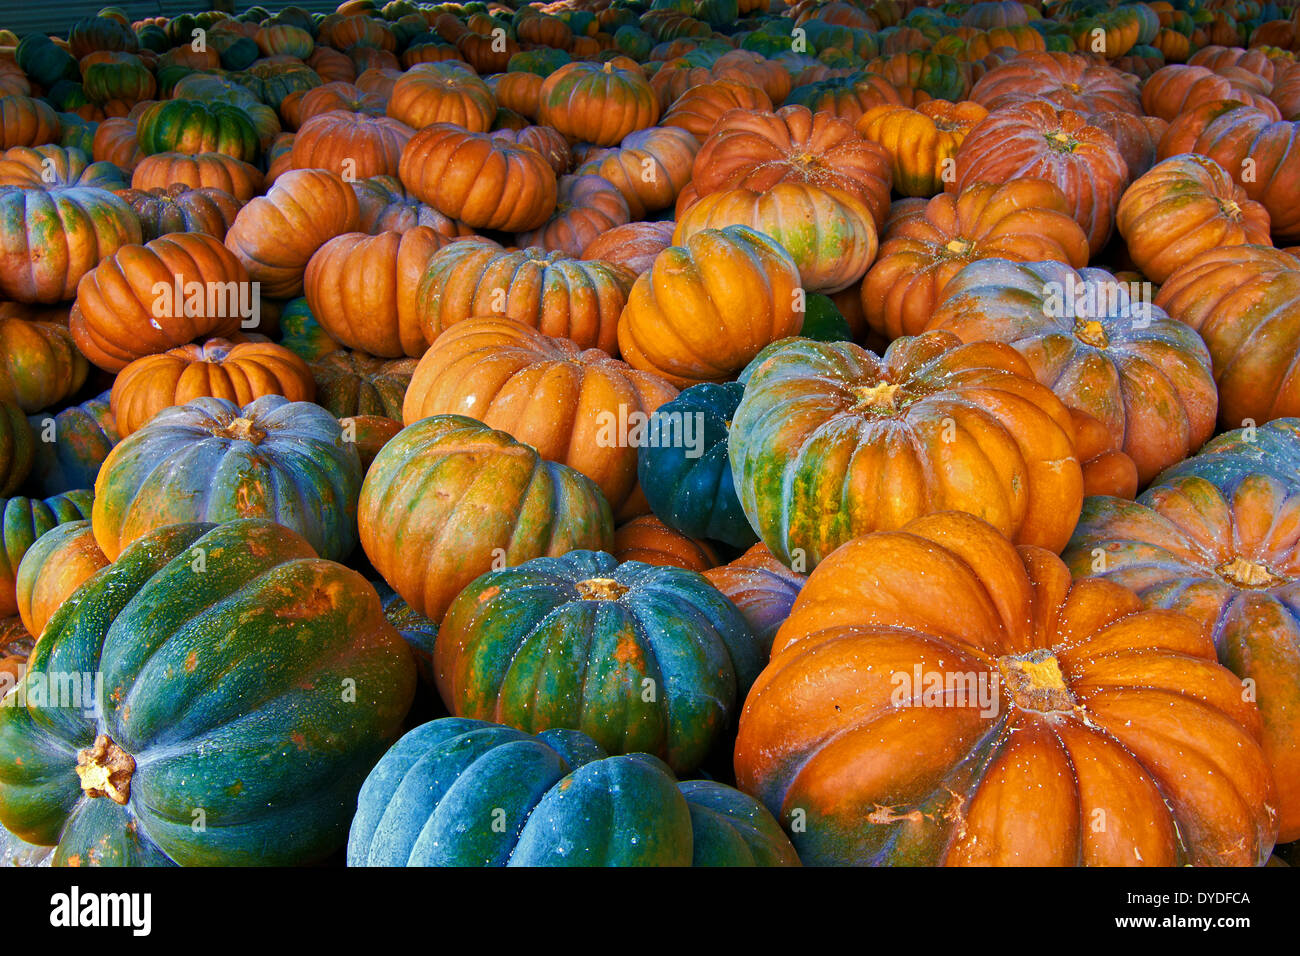 A farm warehouse full of recently harvested pumpkins. Stock Photo